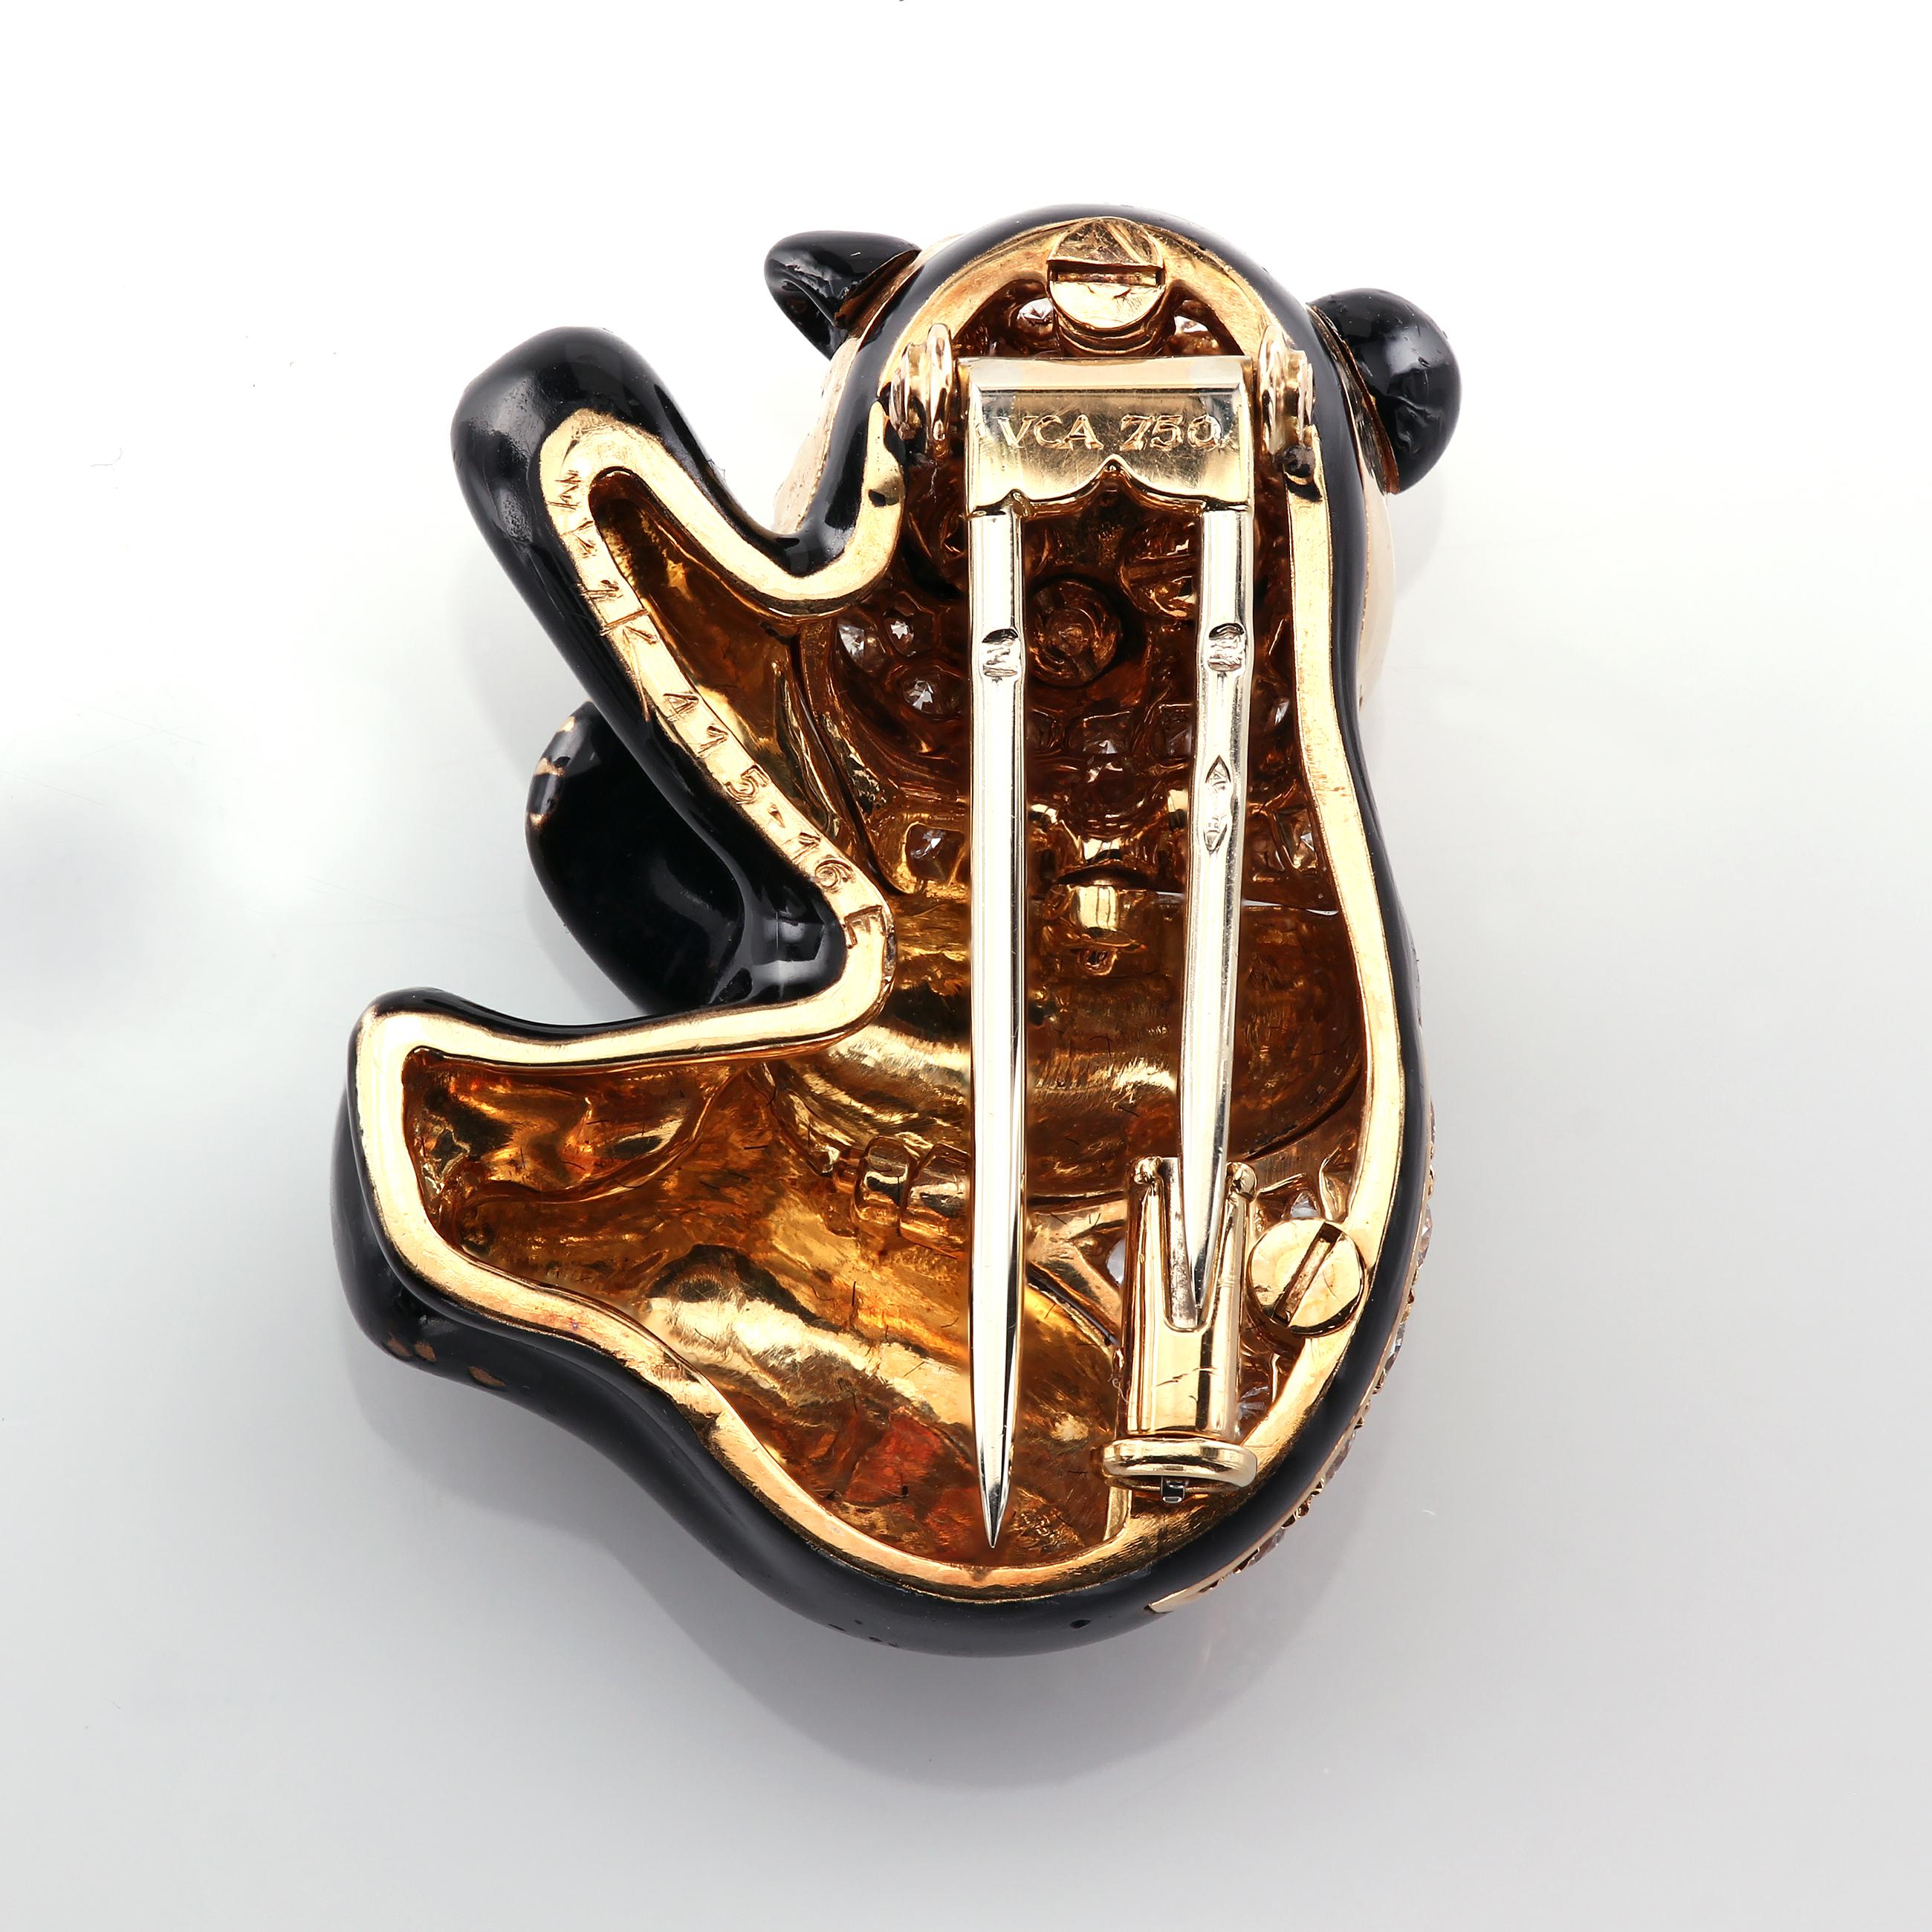 Designed as an onyx panda bear, with a circular-cut diamond face and back, mounted in 18K gold, with French assay marks and maker's mark
Signed V.C.A. for Van Cleef & Arpels, N.Y
Serial number k415-16E
28,5 x 20.7 x 11.7 mm
17.2 g
Pristine condition